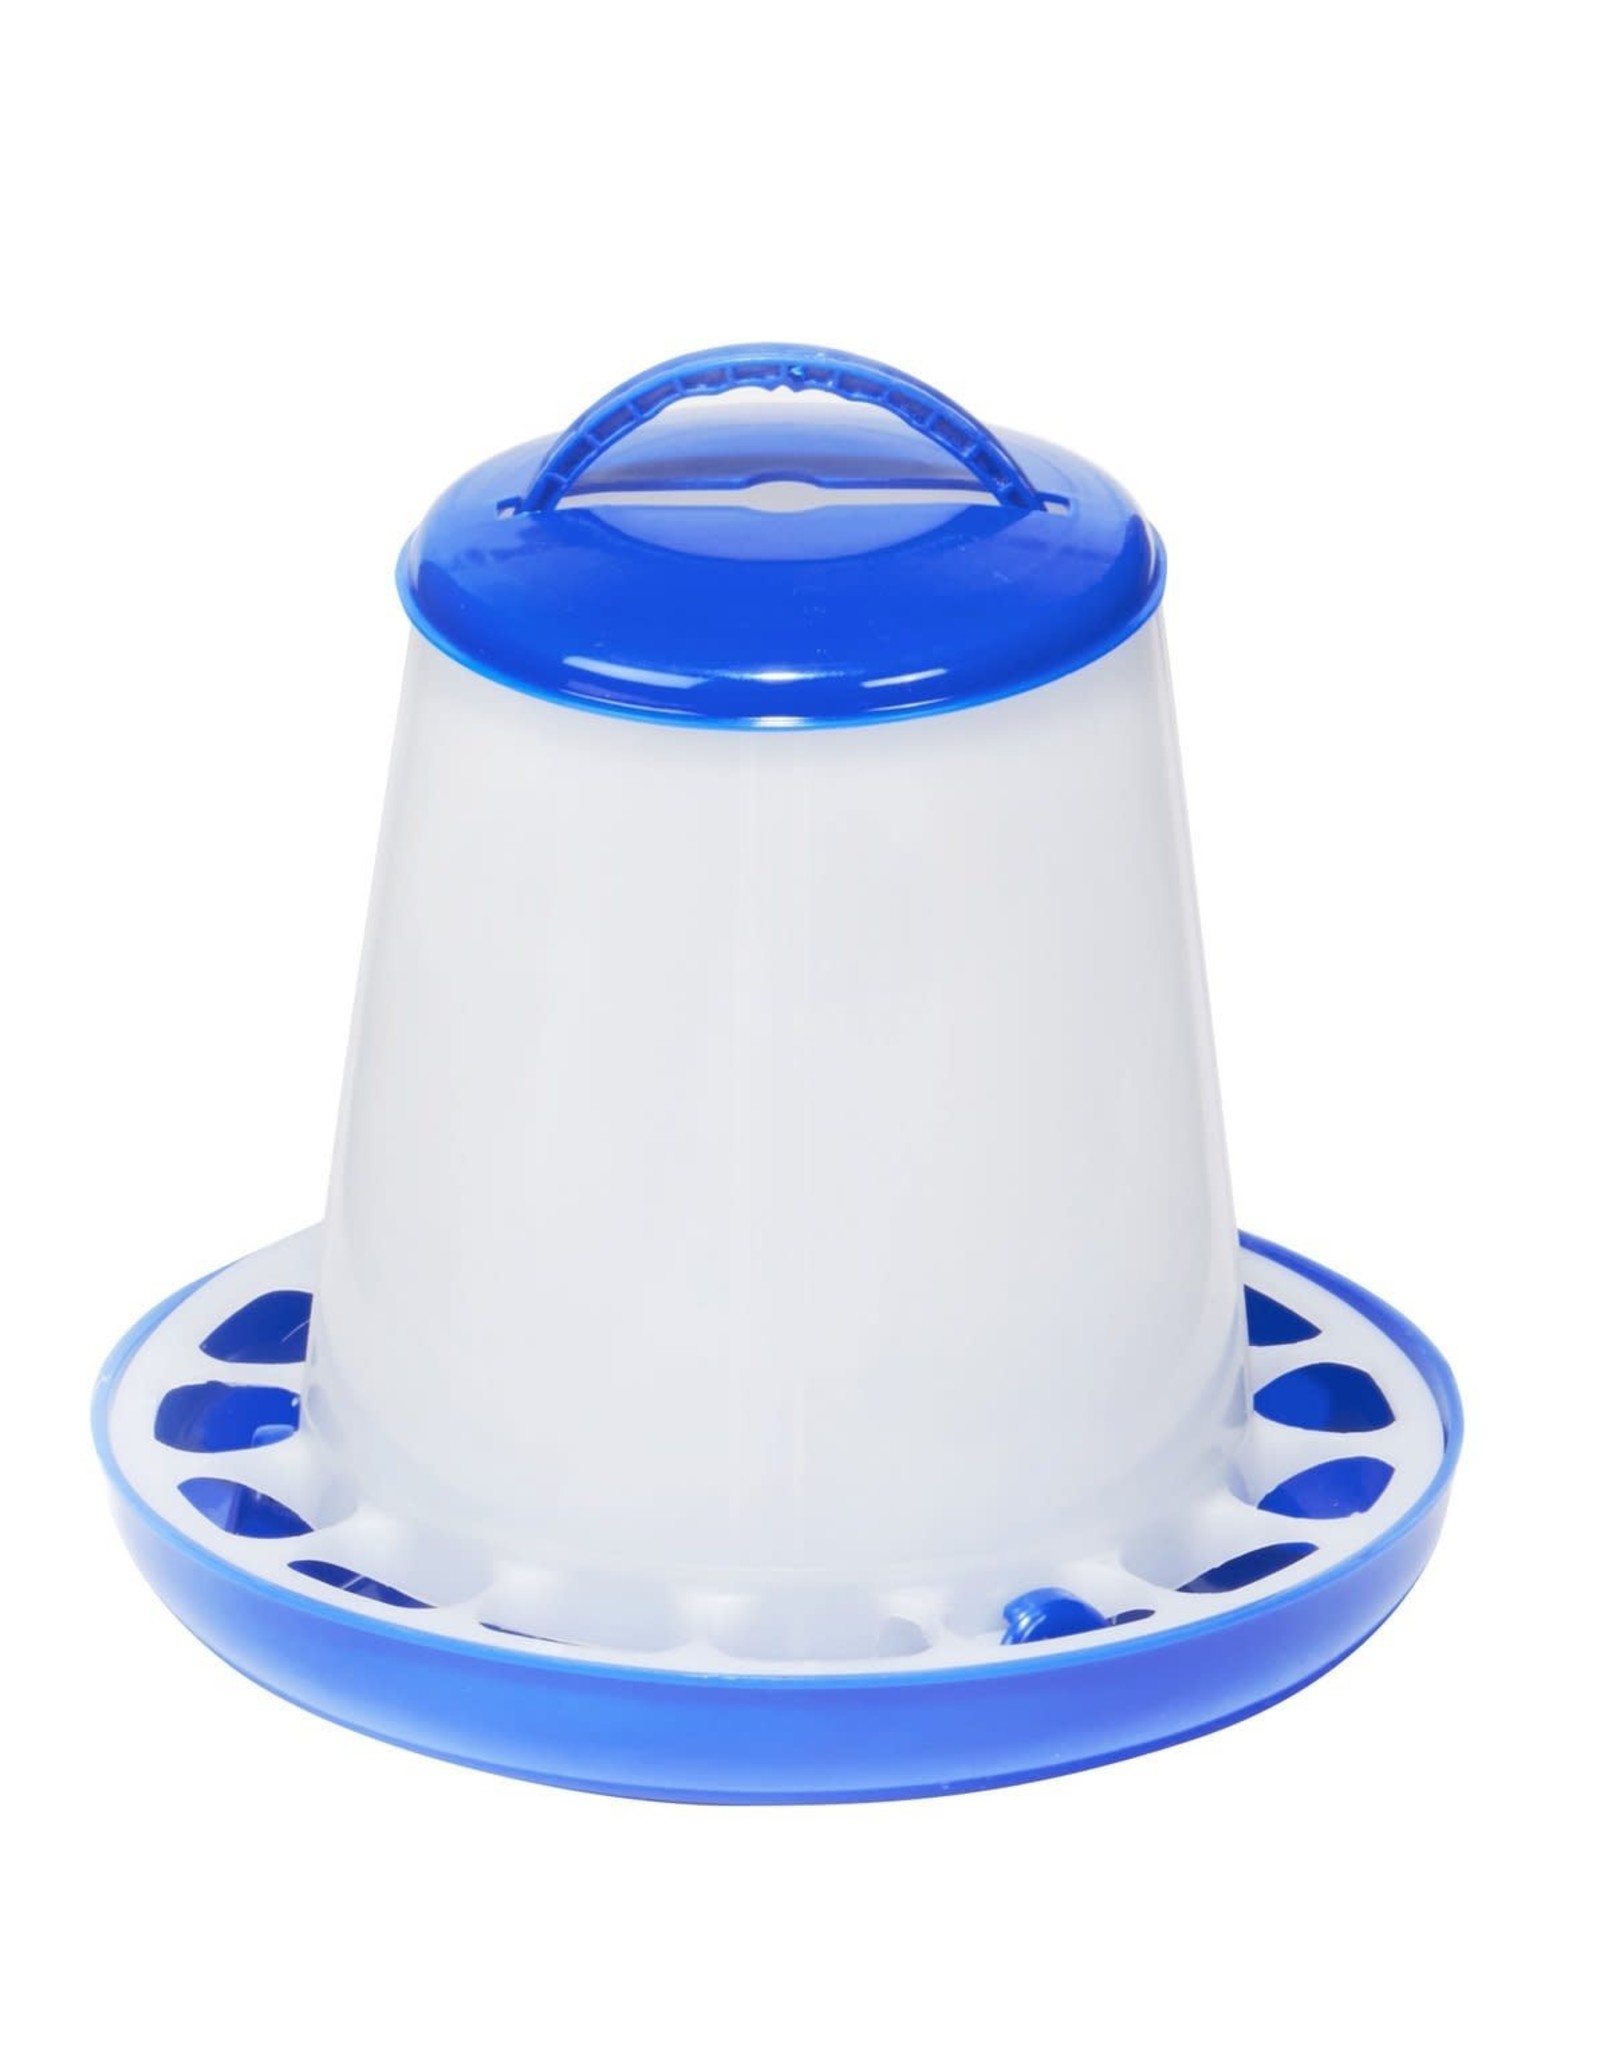 Double-Tuf Plastic Poultry Feeder